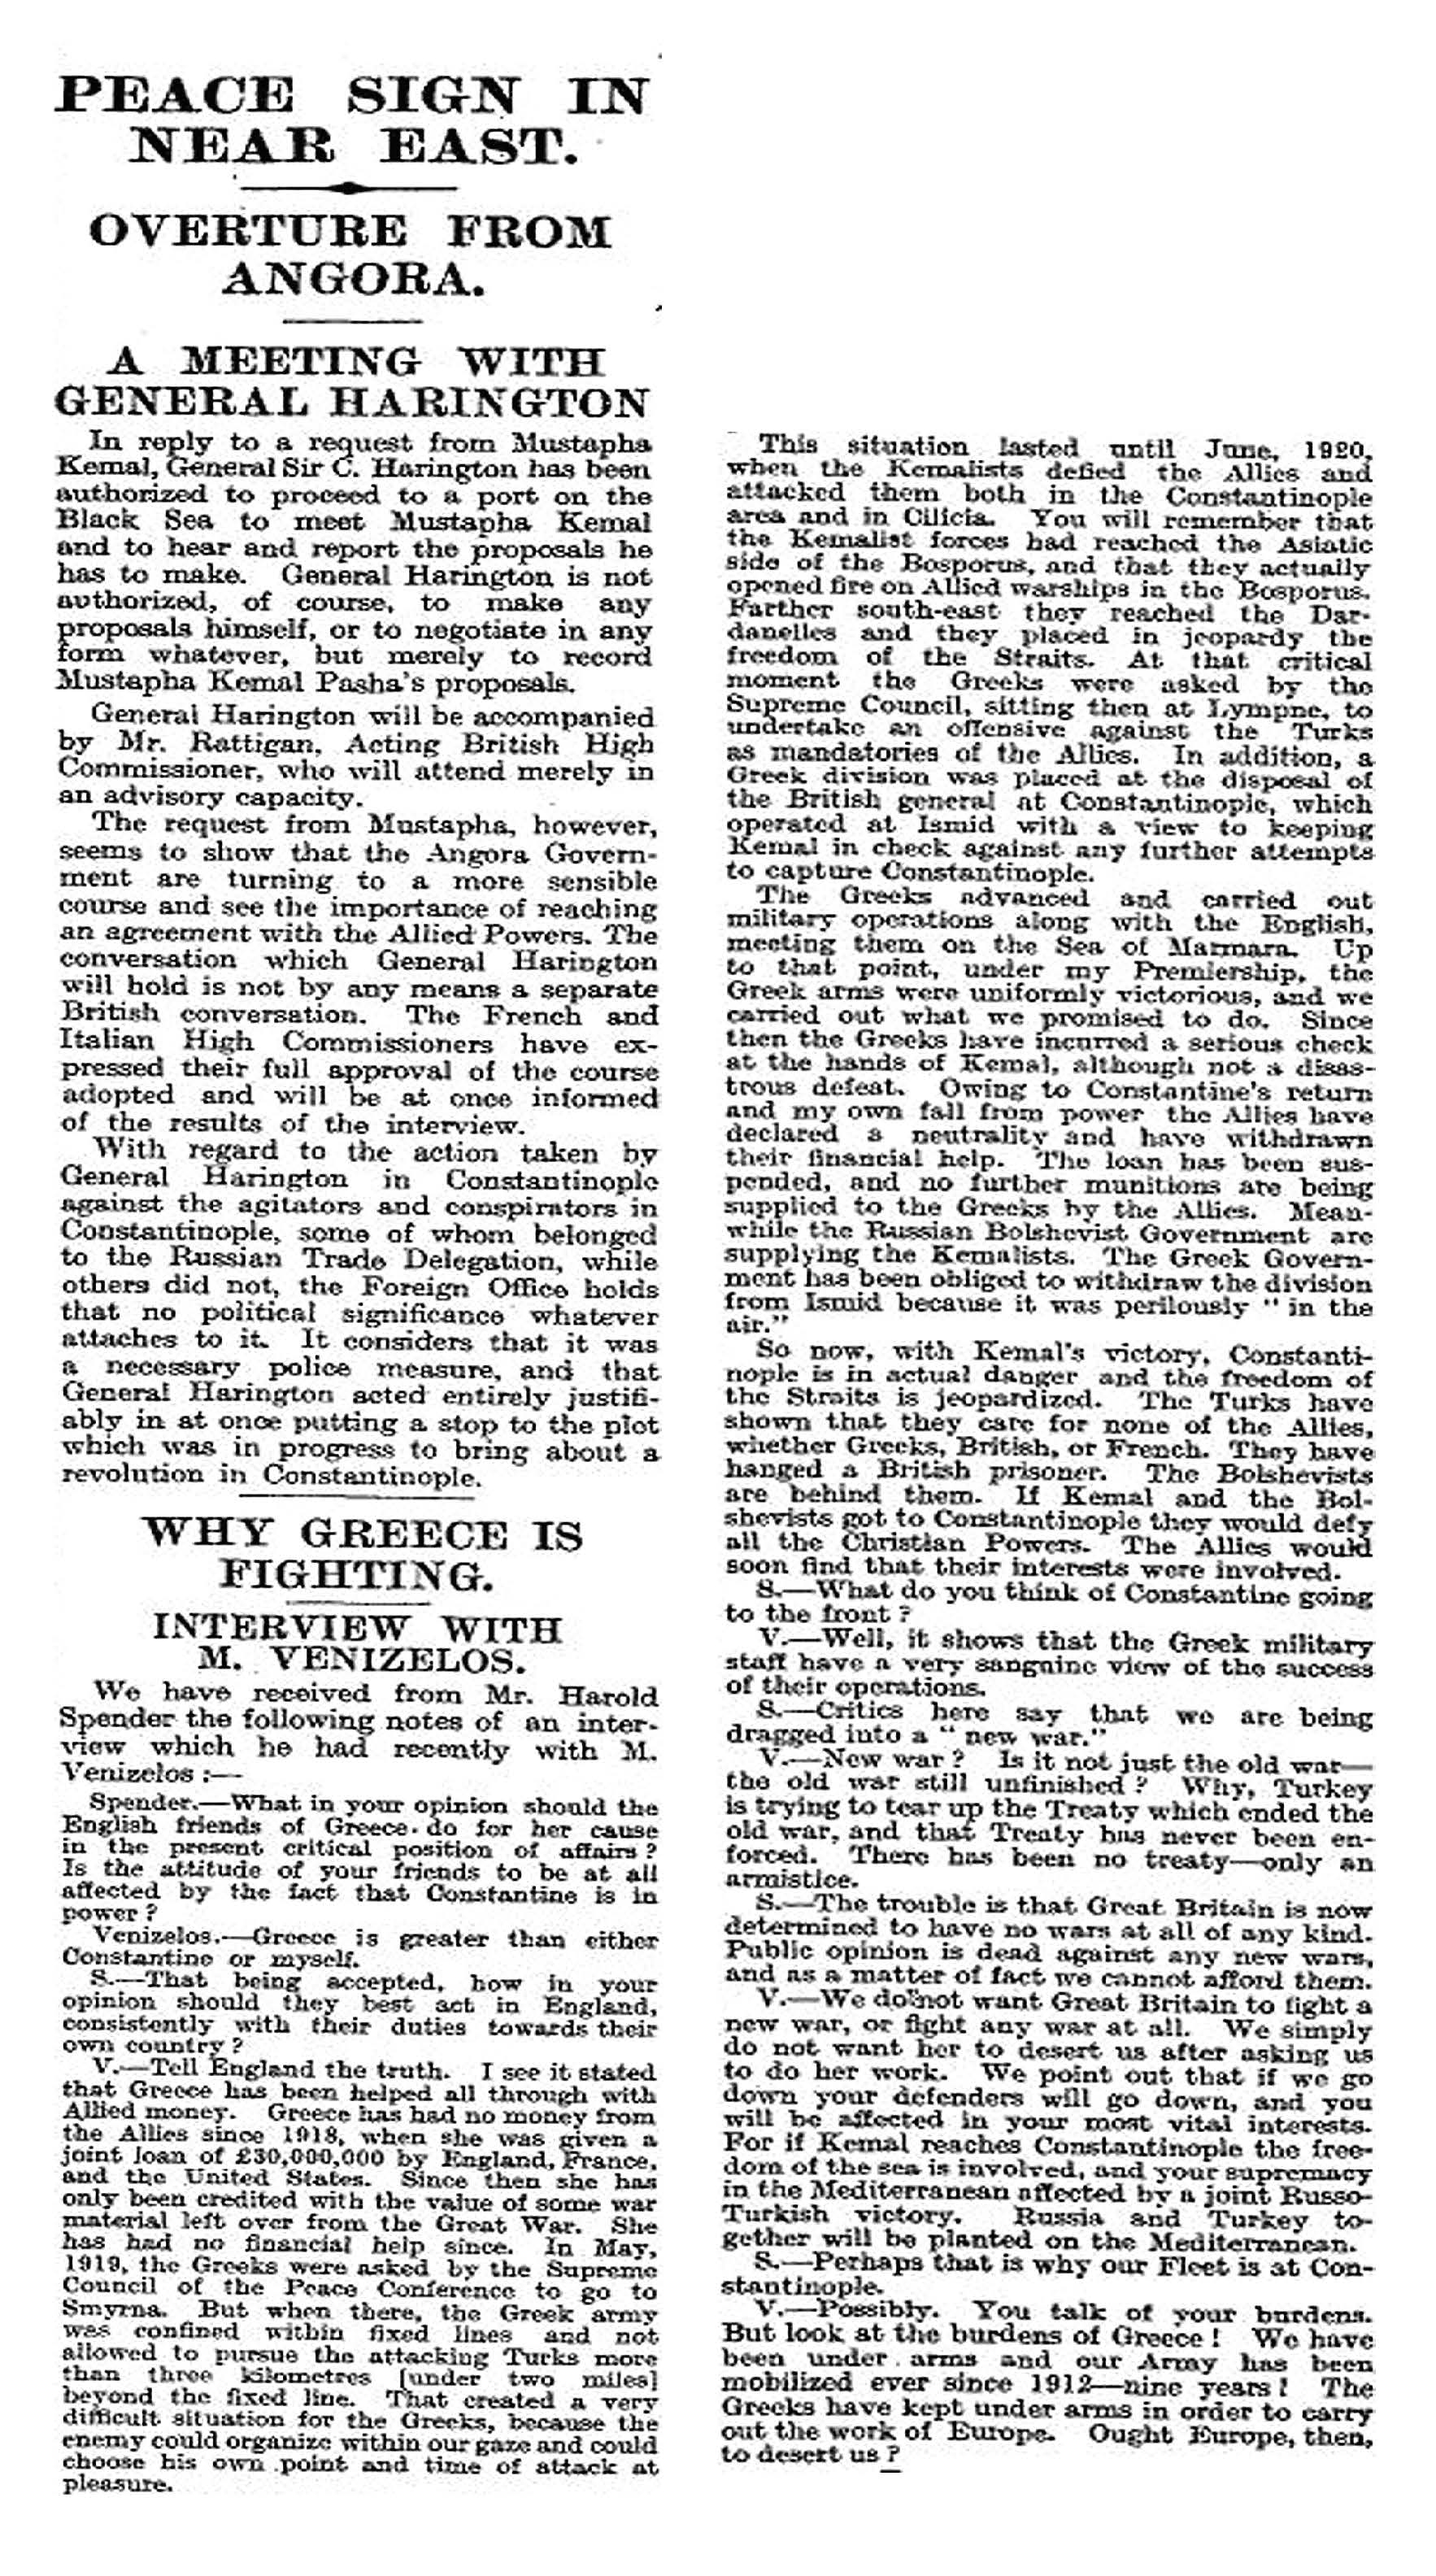 The Times (London, England), Friday, Jul 08, 1921; page.10; Issue 42767.